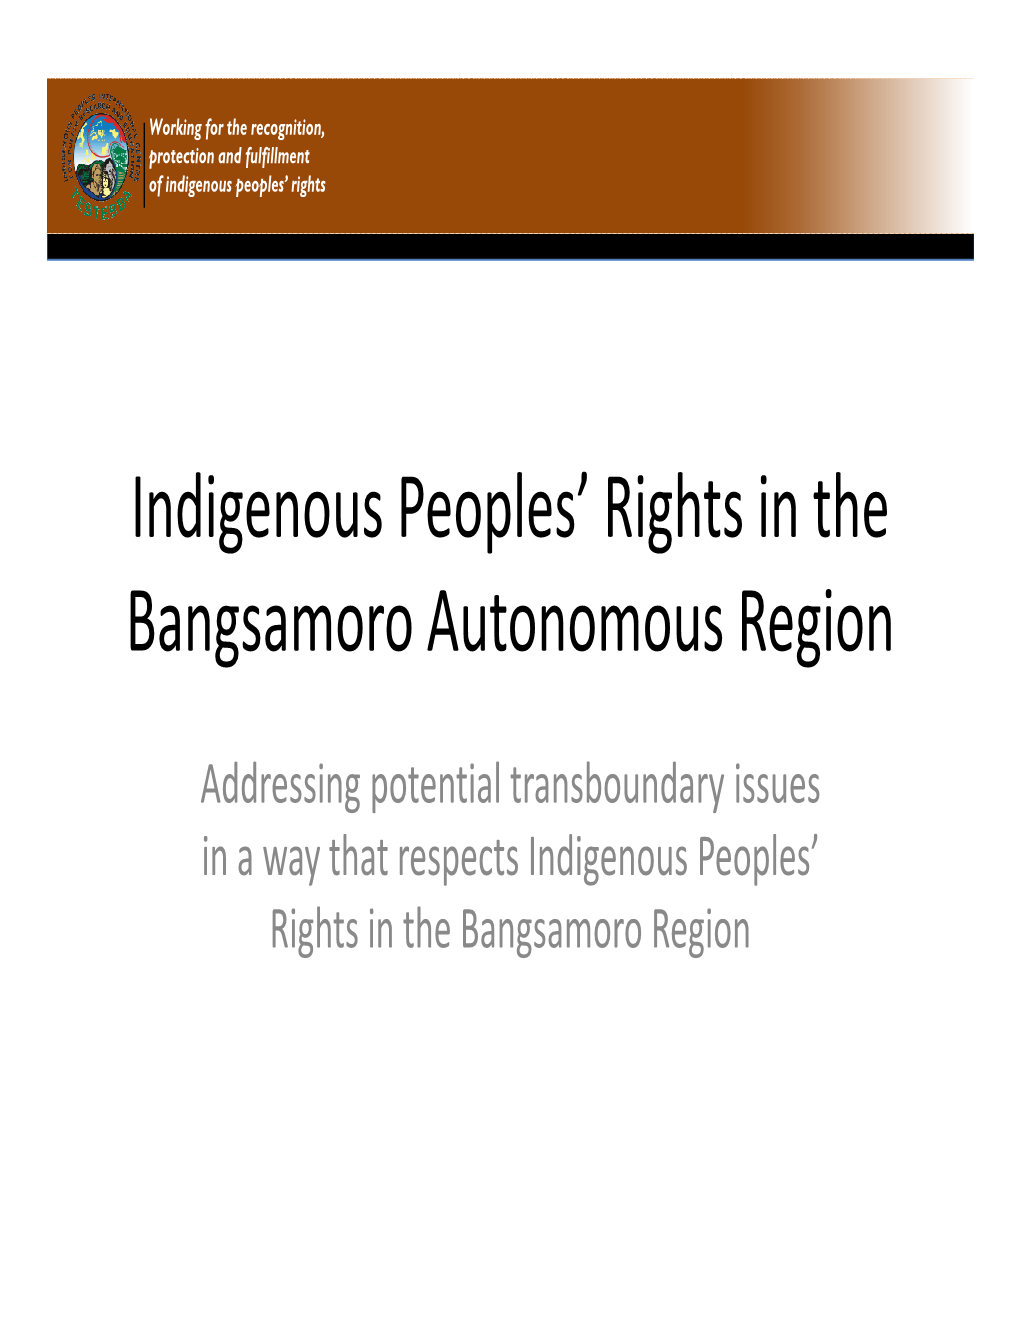 Indigenous Peoples' Rights in the Bangsamoro Autonomous Region